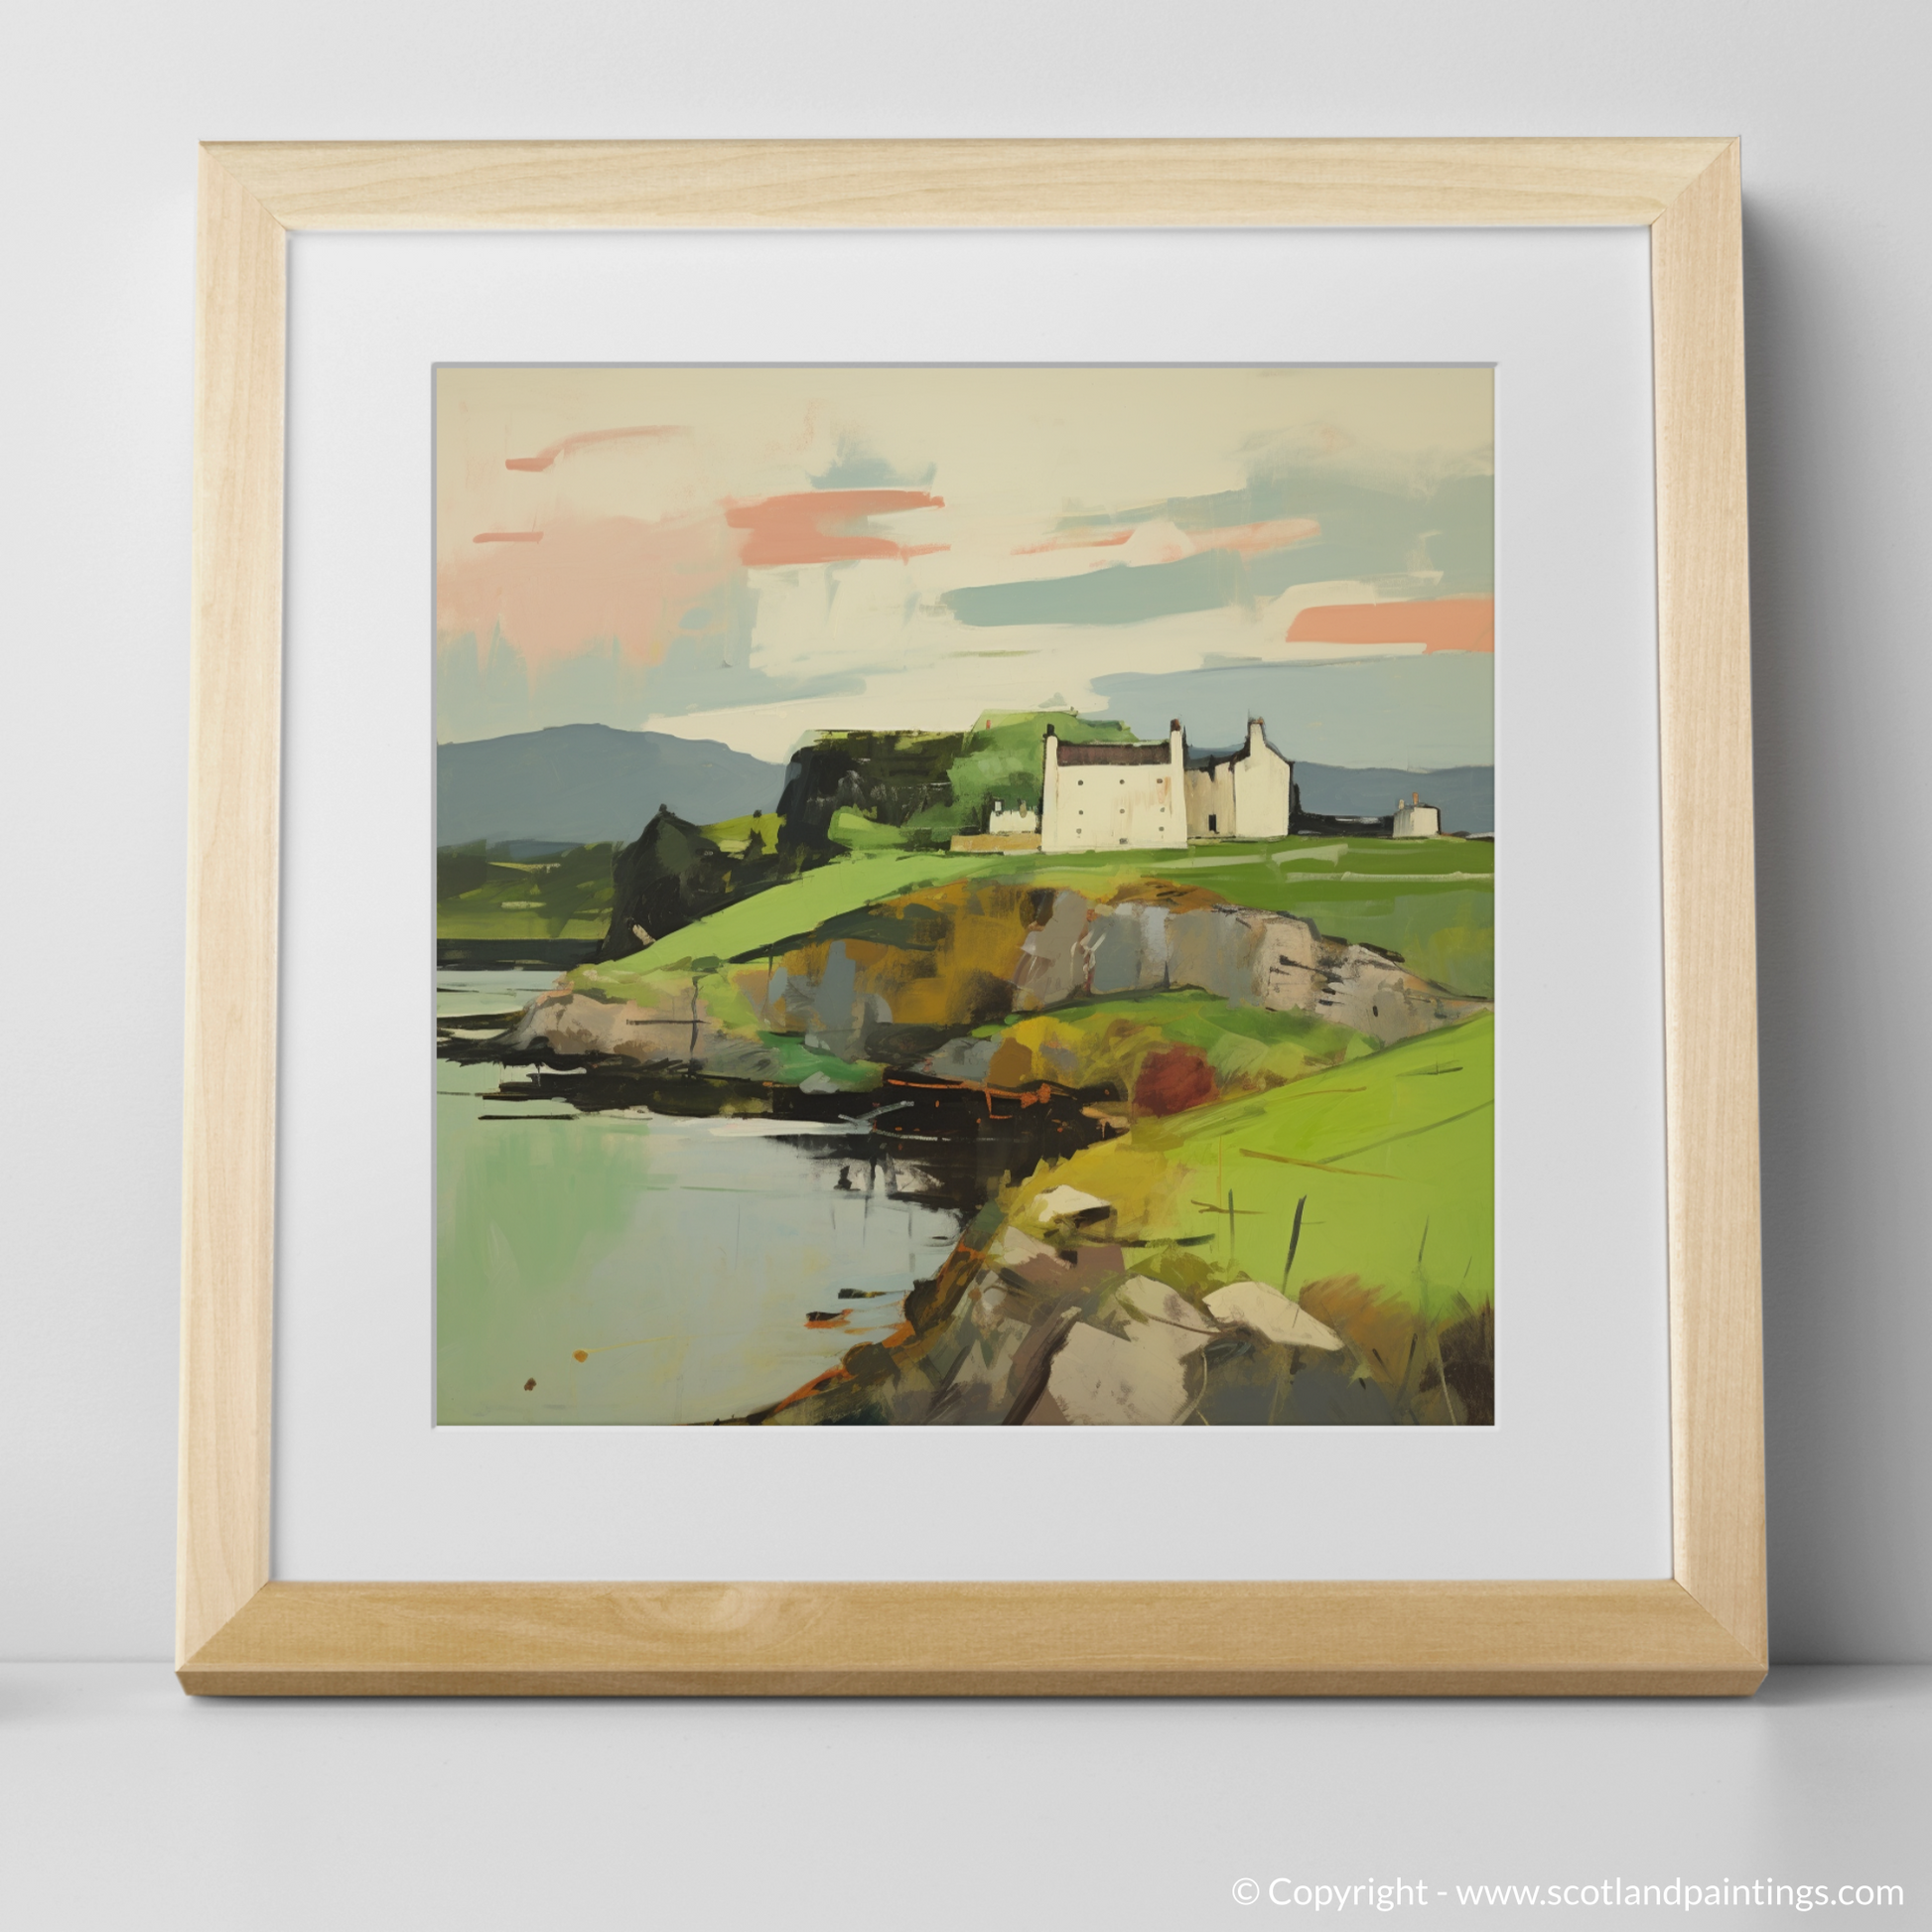 Art Print of Fort William with a natural frame